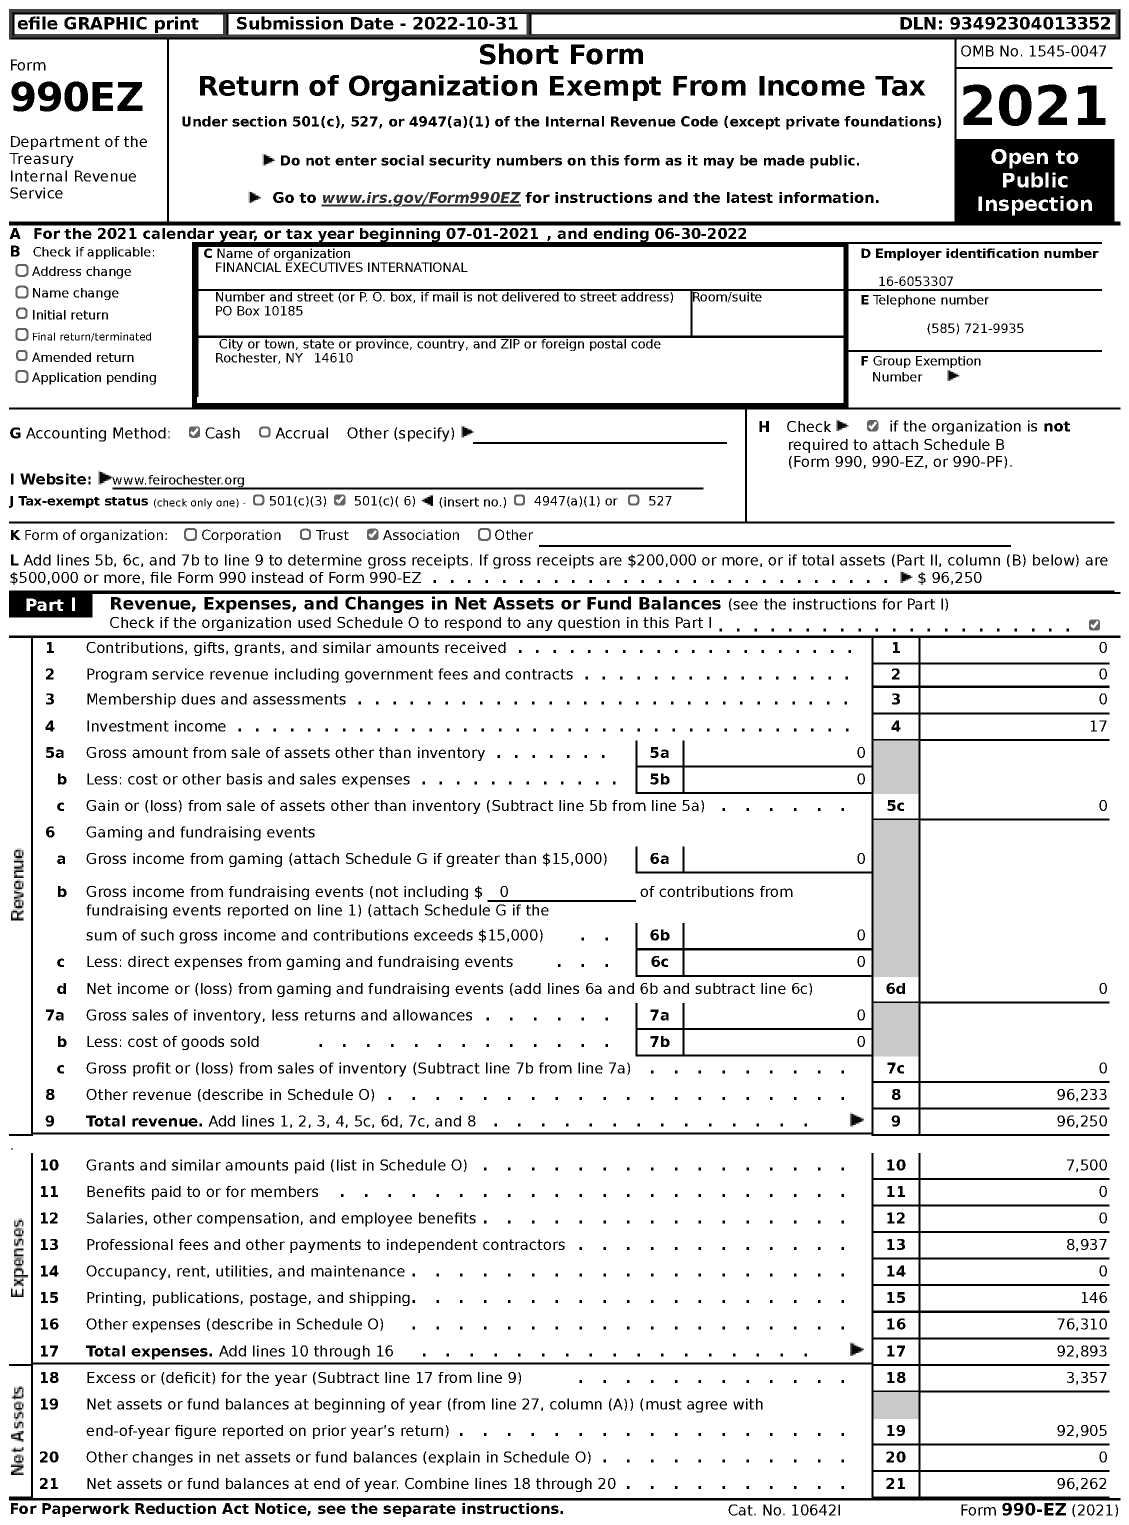 Image of first page of 2021 Form 990EZ for Financial Executives International / Rochester Chapter